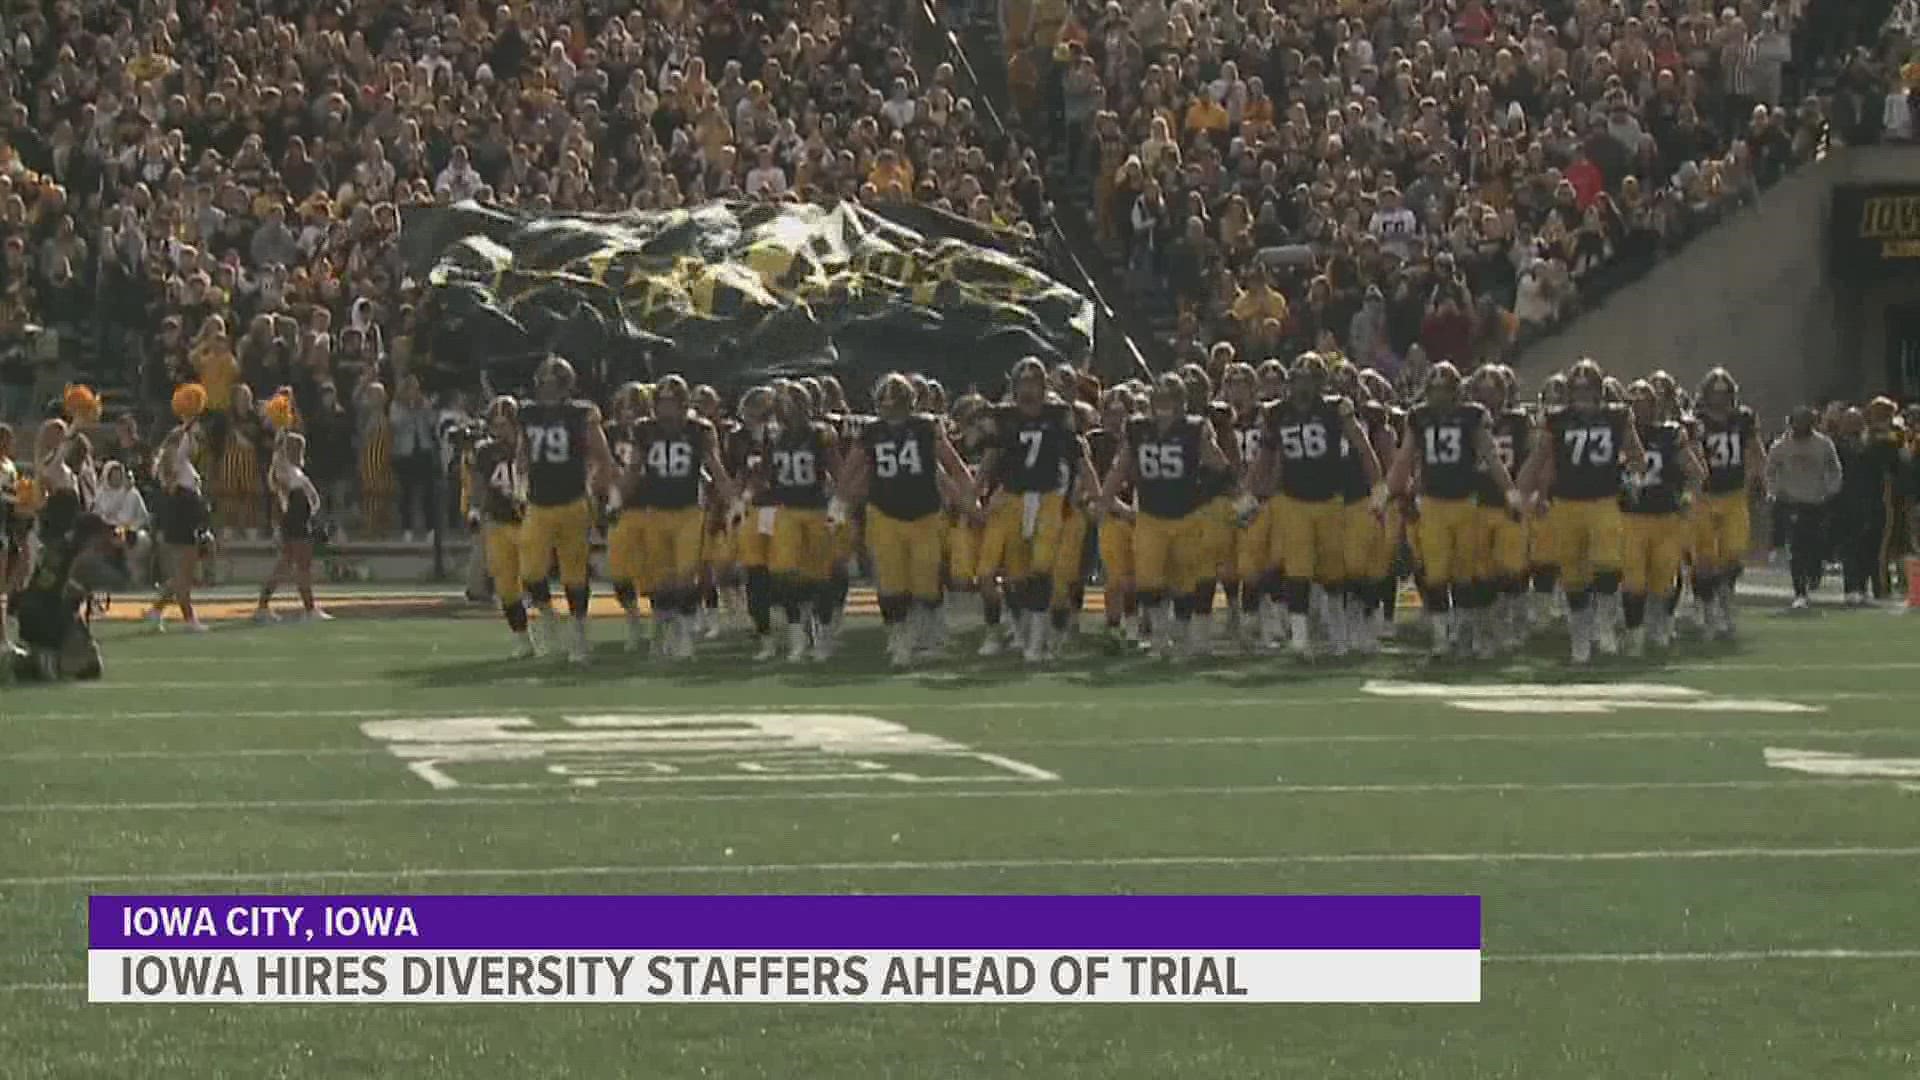 A trial over discrimination allegations is set for March 2023, with former football players seeking monetary damages and cultural changes inside Hawkeye athletics.